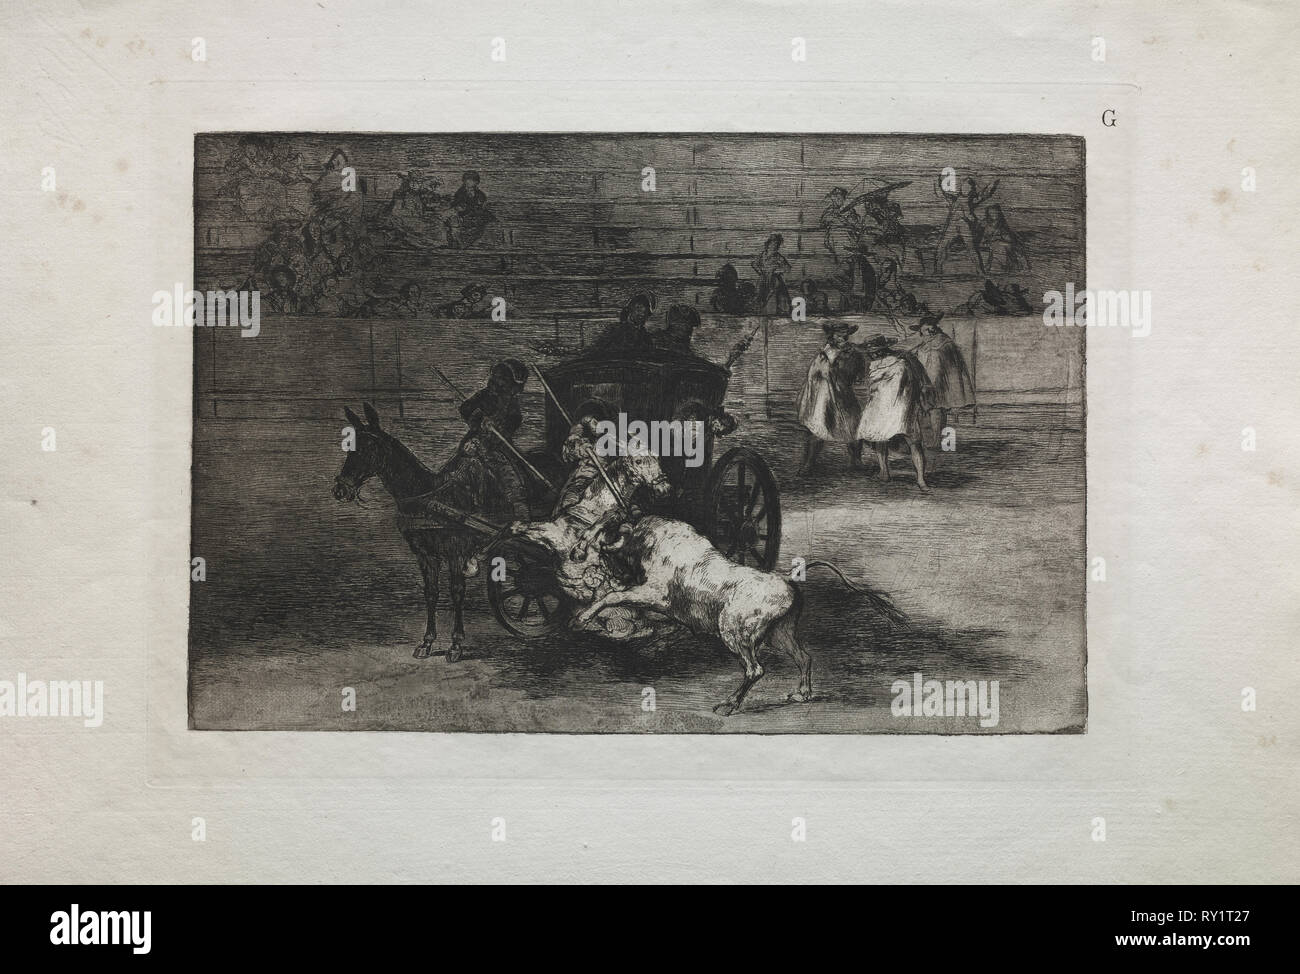 Bullfights:  Fight in a Carriage Harnessed to Two Mules, 1876. Francisco de Goya (Spanish, 1746-1828). Engraving Stock Photo